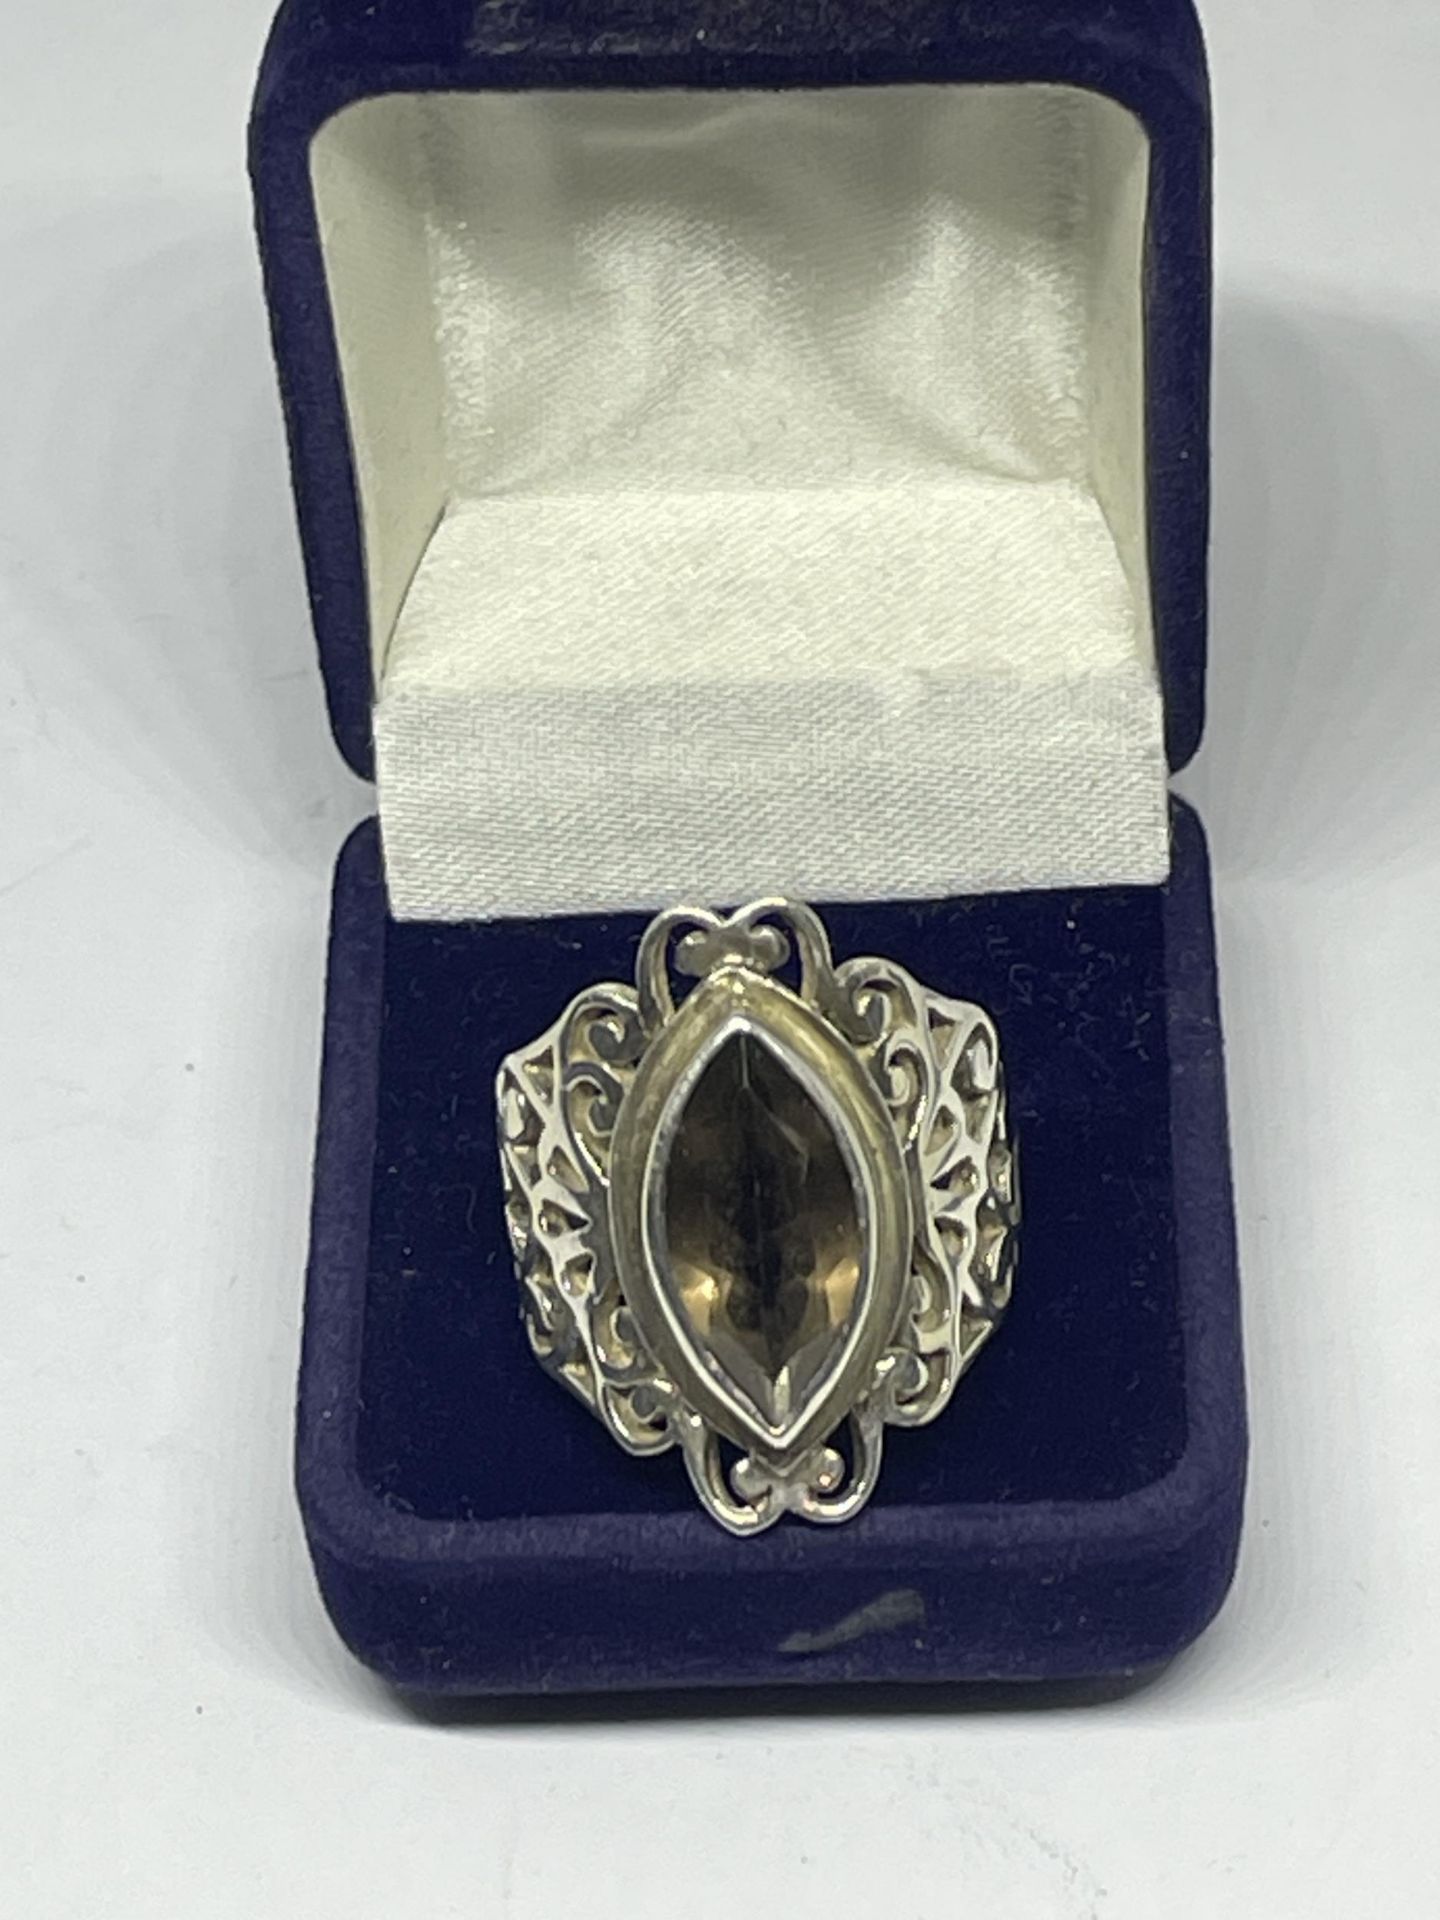 A SILVER DRESS RING WITH A SMOKEY STONE SIZE P/Q IN A PRESENTATION BOX